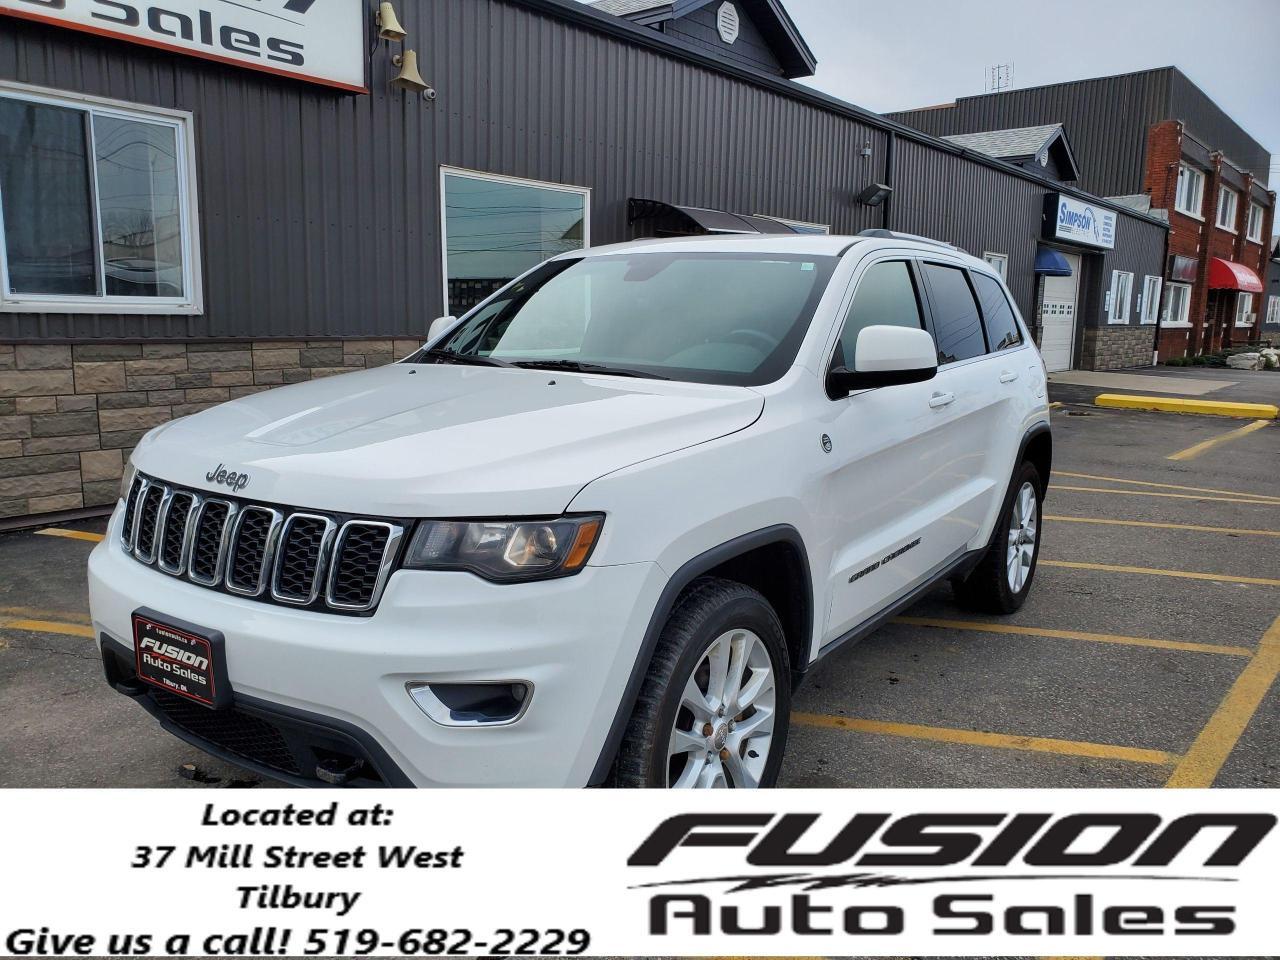 2018 Jeep Grand Cherokee LAREDO 4x4-NO HST TO A MAX OF $2000 LTD TIME ONLY